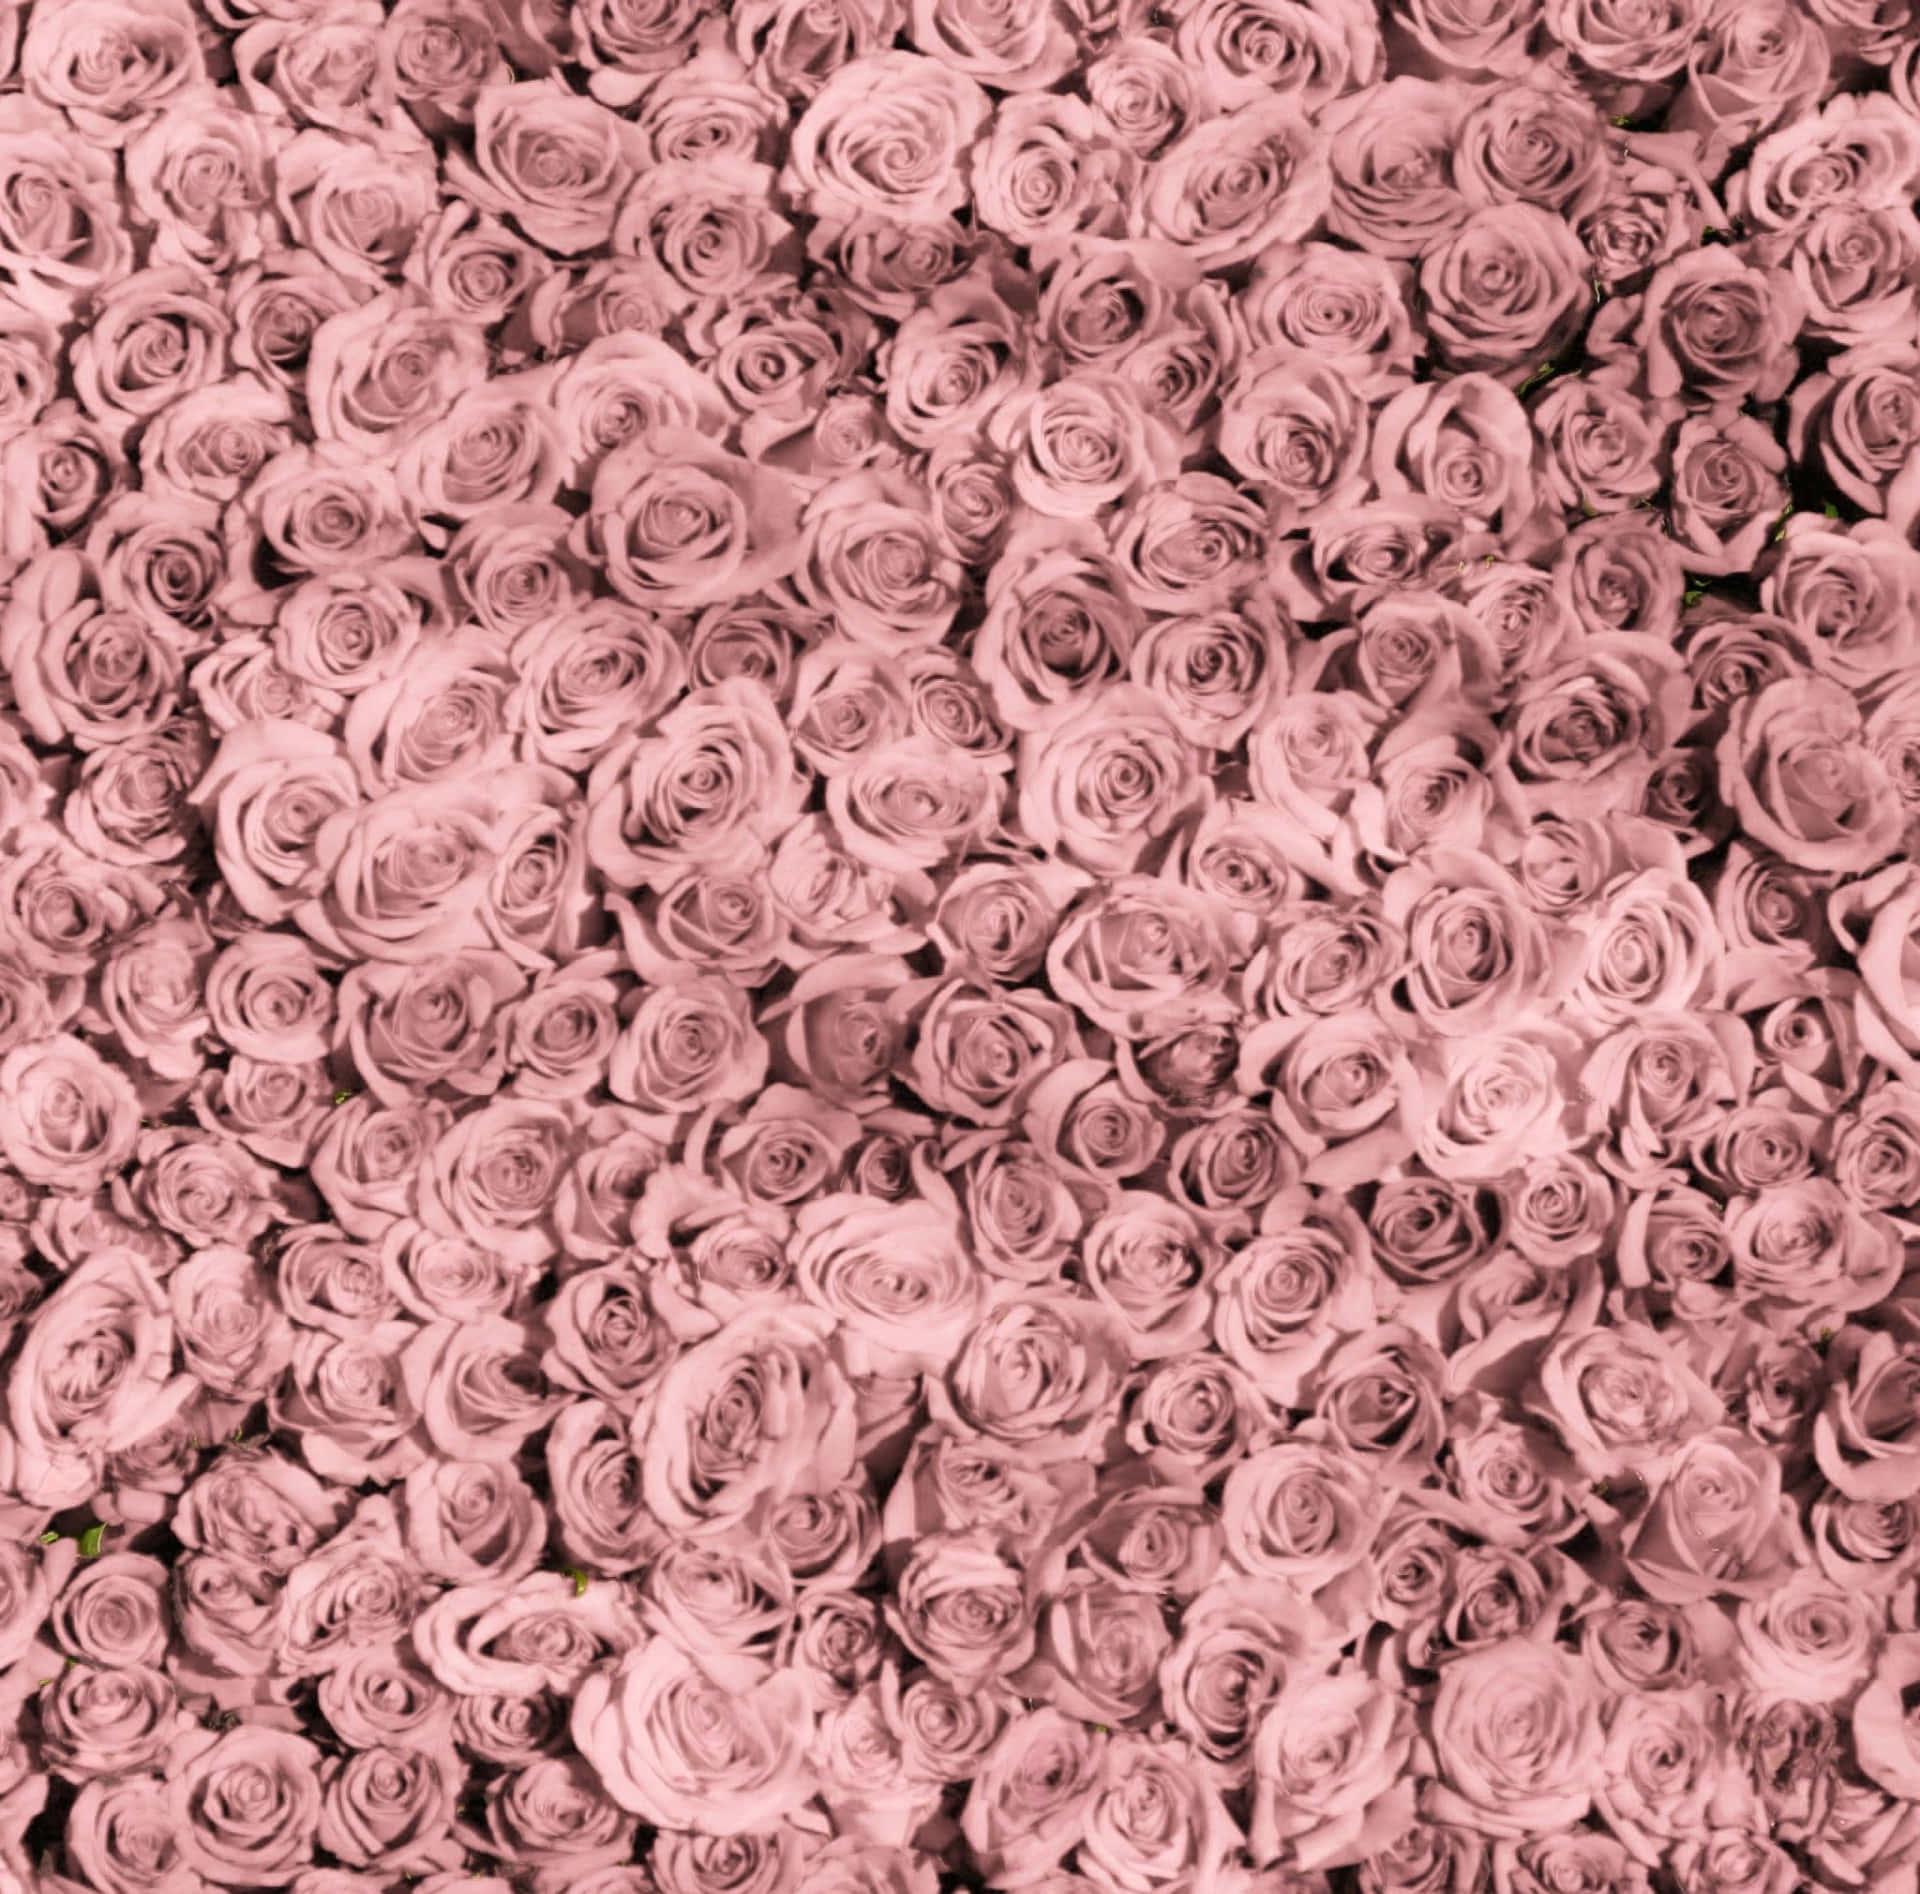 Tumblr Ipad Aesthetic Pink Roses Background